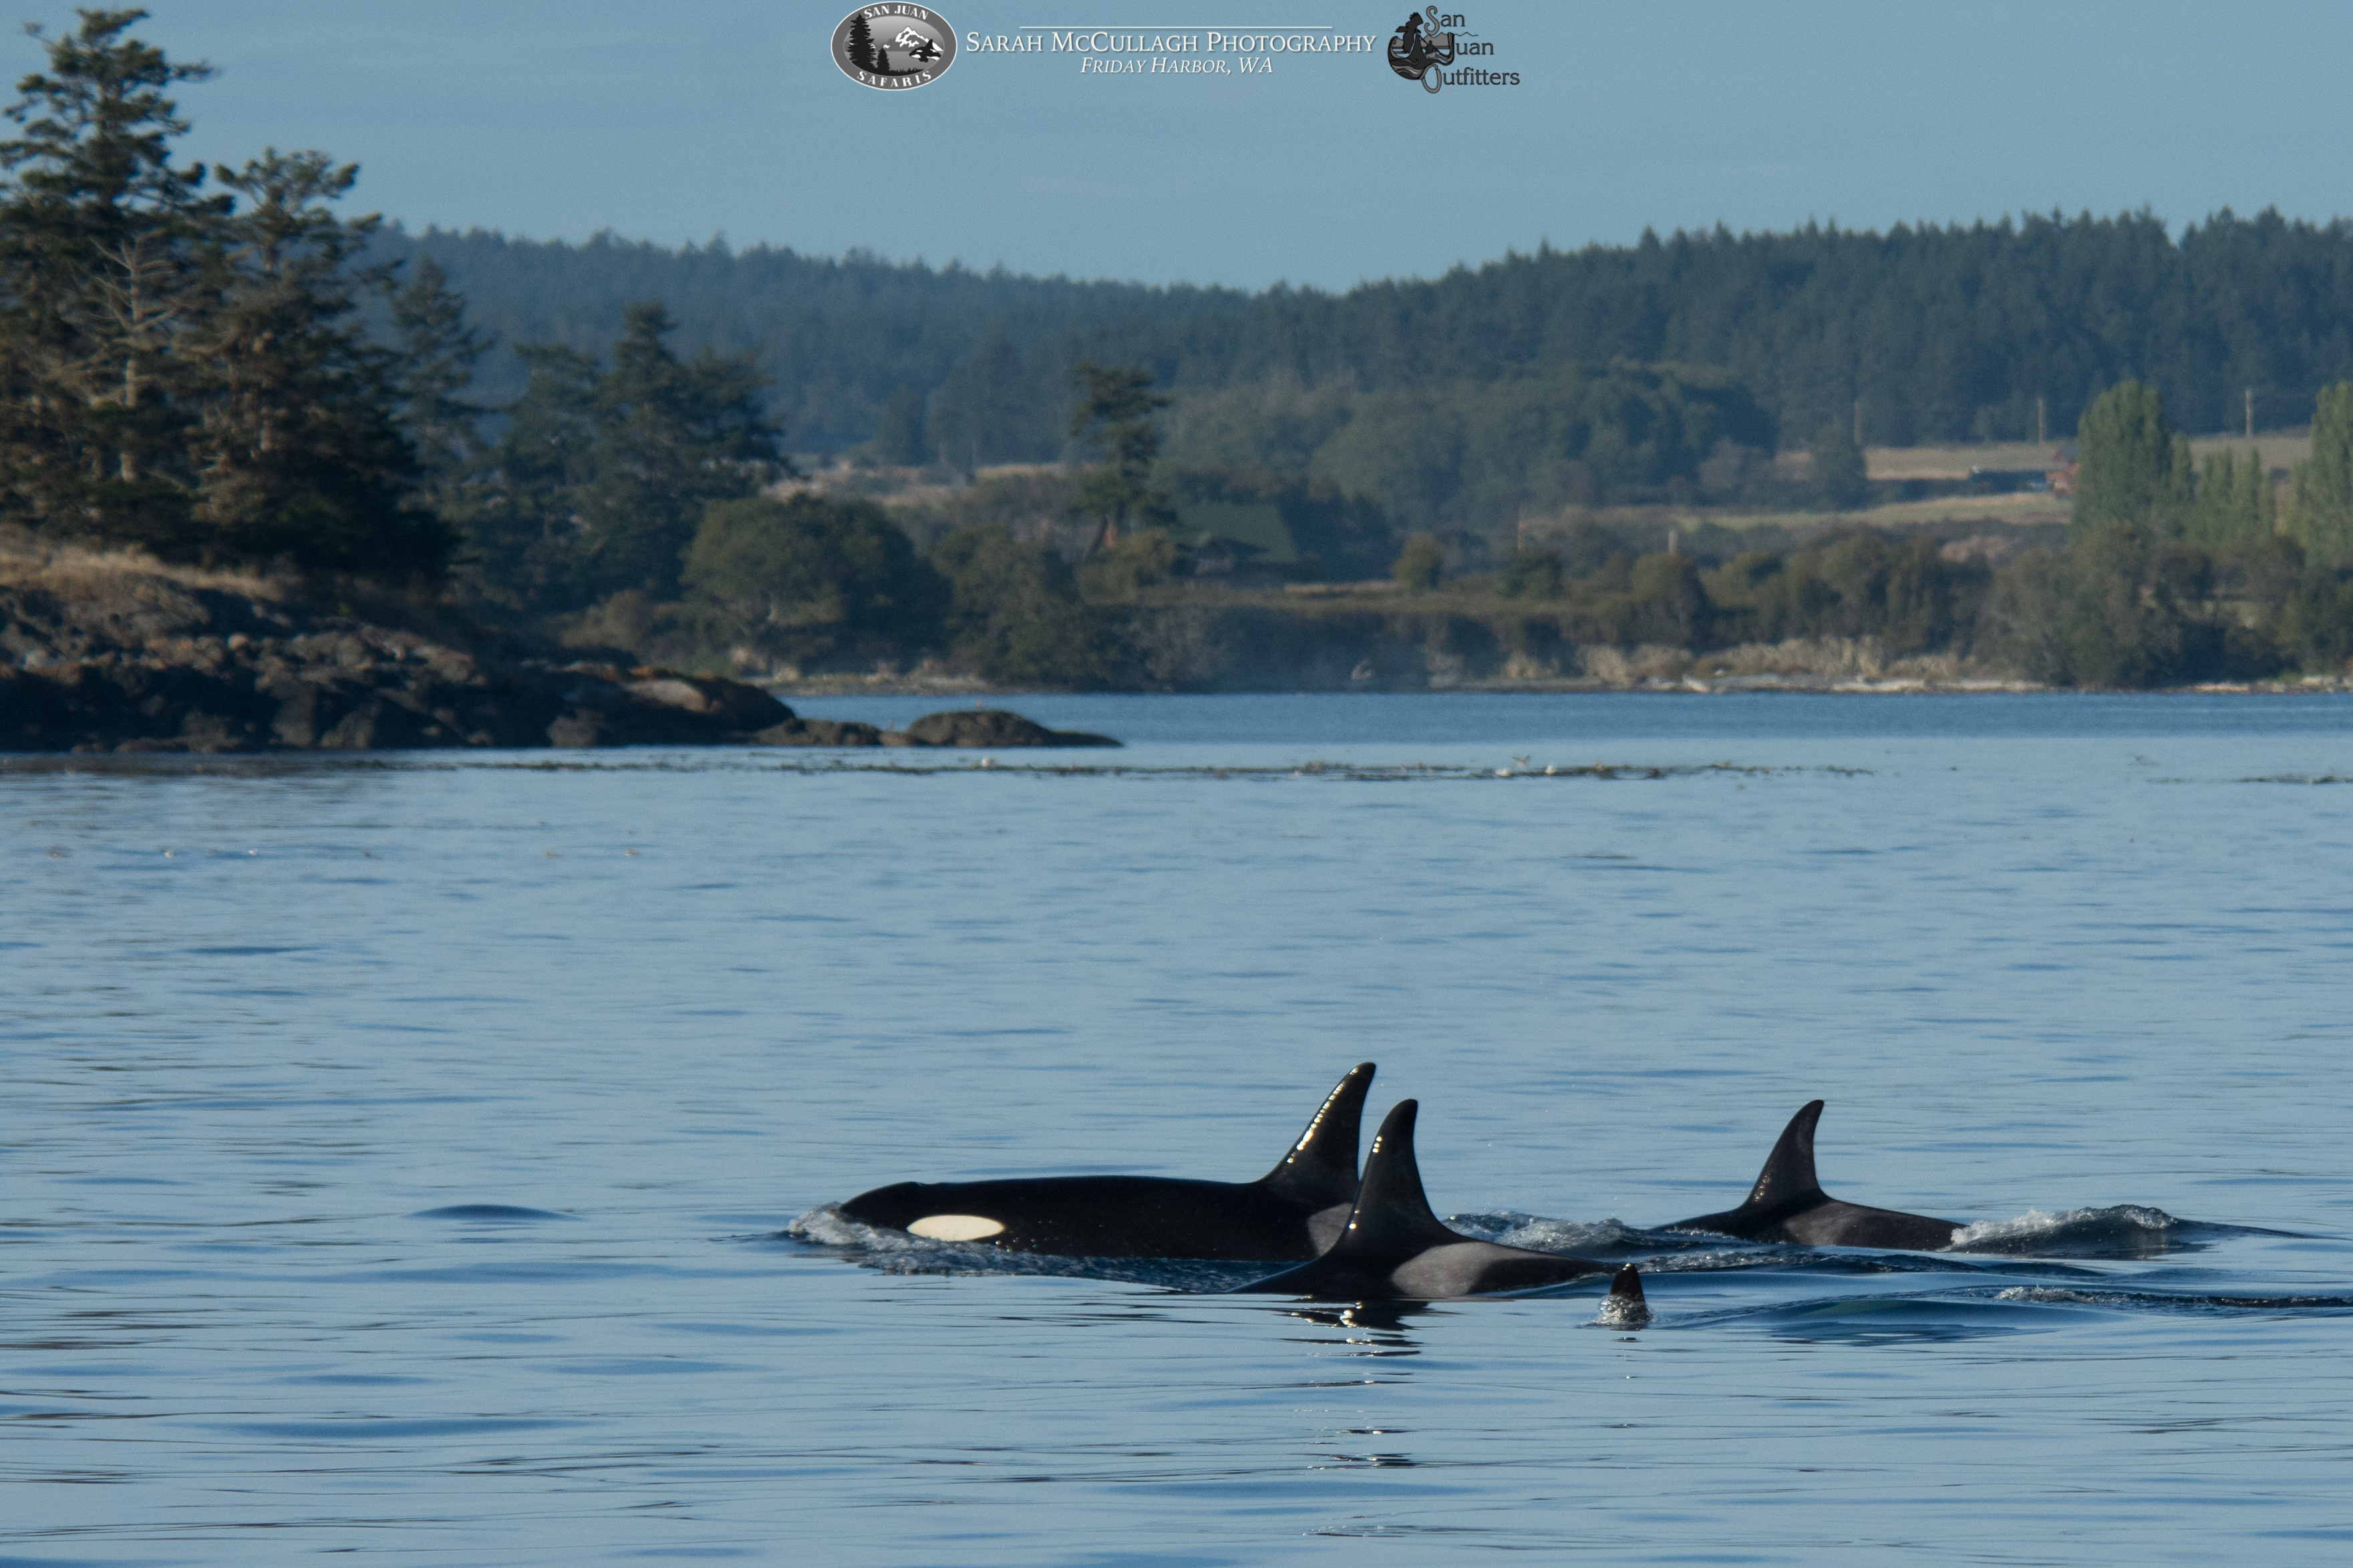 Southern Resident Killer Whales in the Salish Sea – Sunday 09/10/2017